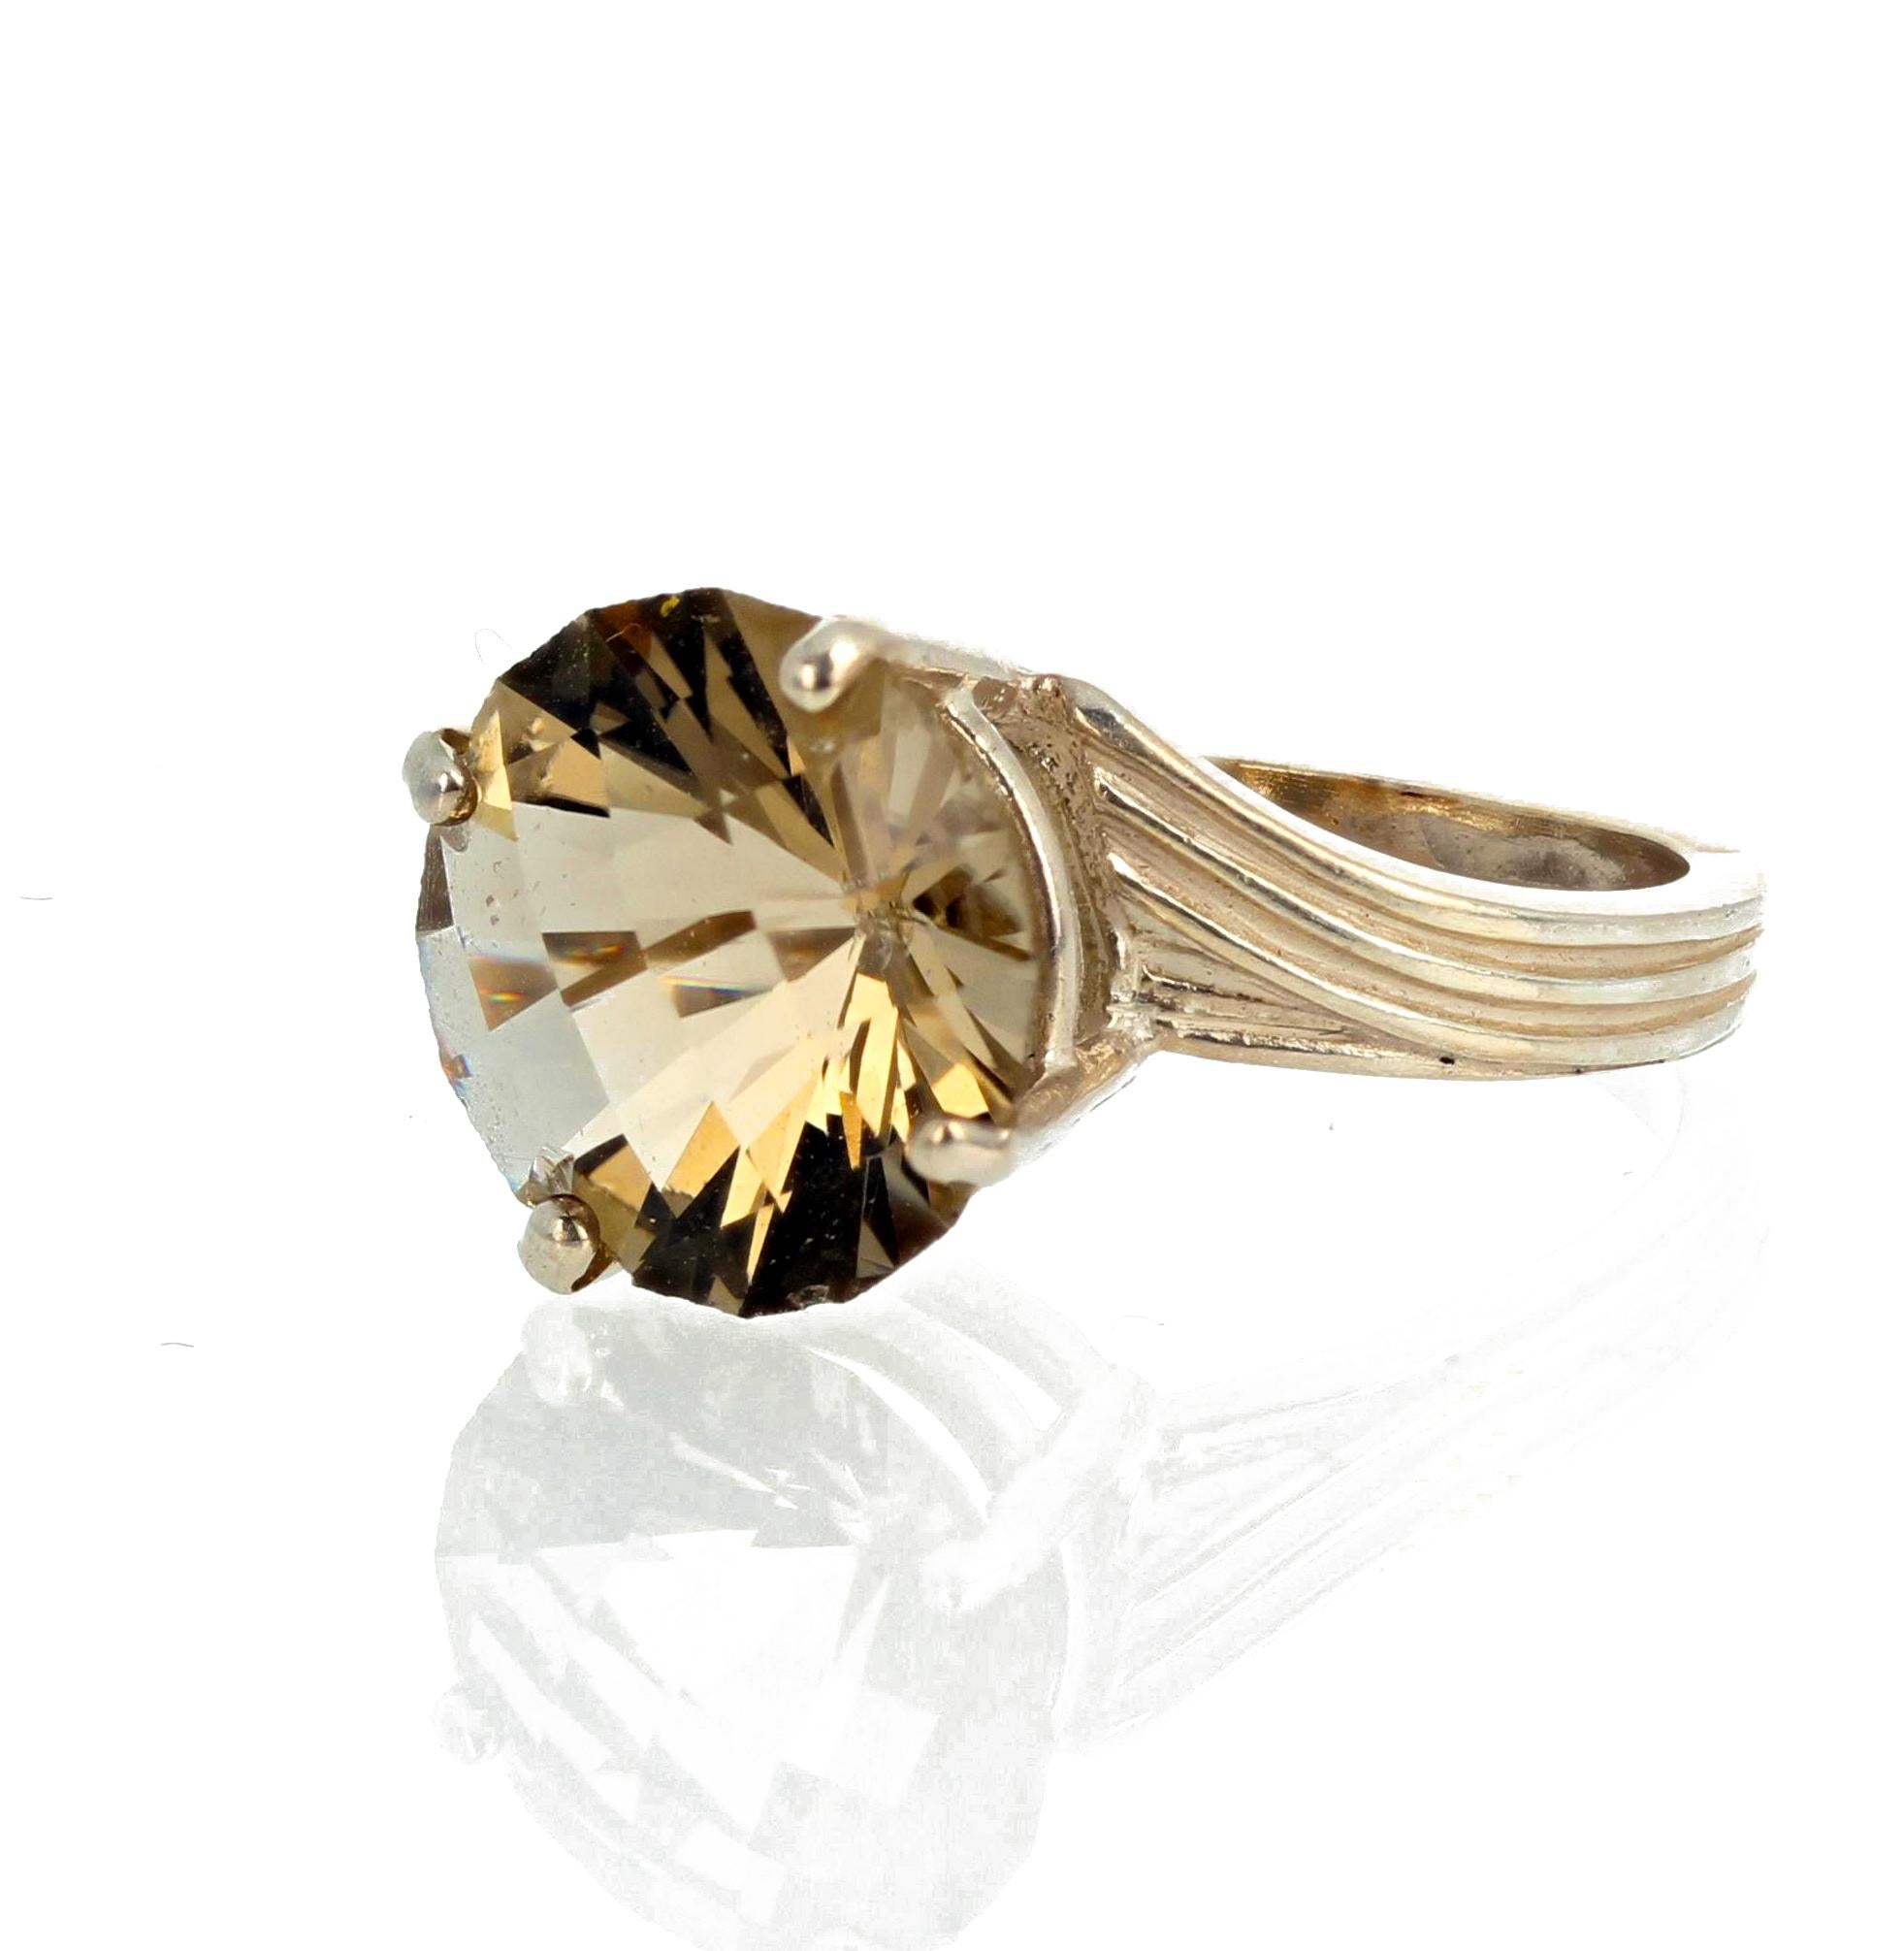 This yellow/goldy 4 carat Labradorite (12 mm) is cut to glow like a large champagne diamond.  It is a size 7 (sizable) set in a sterling silver ring.  